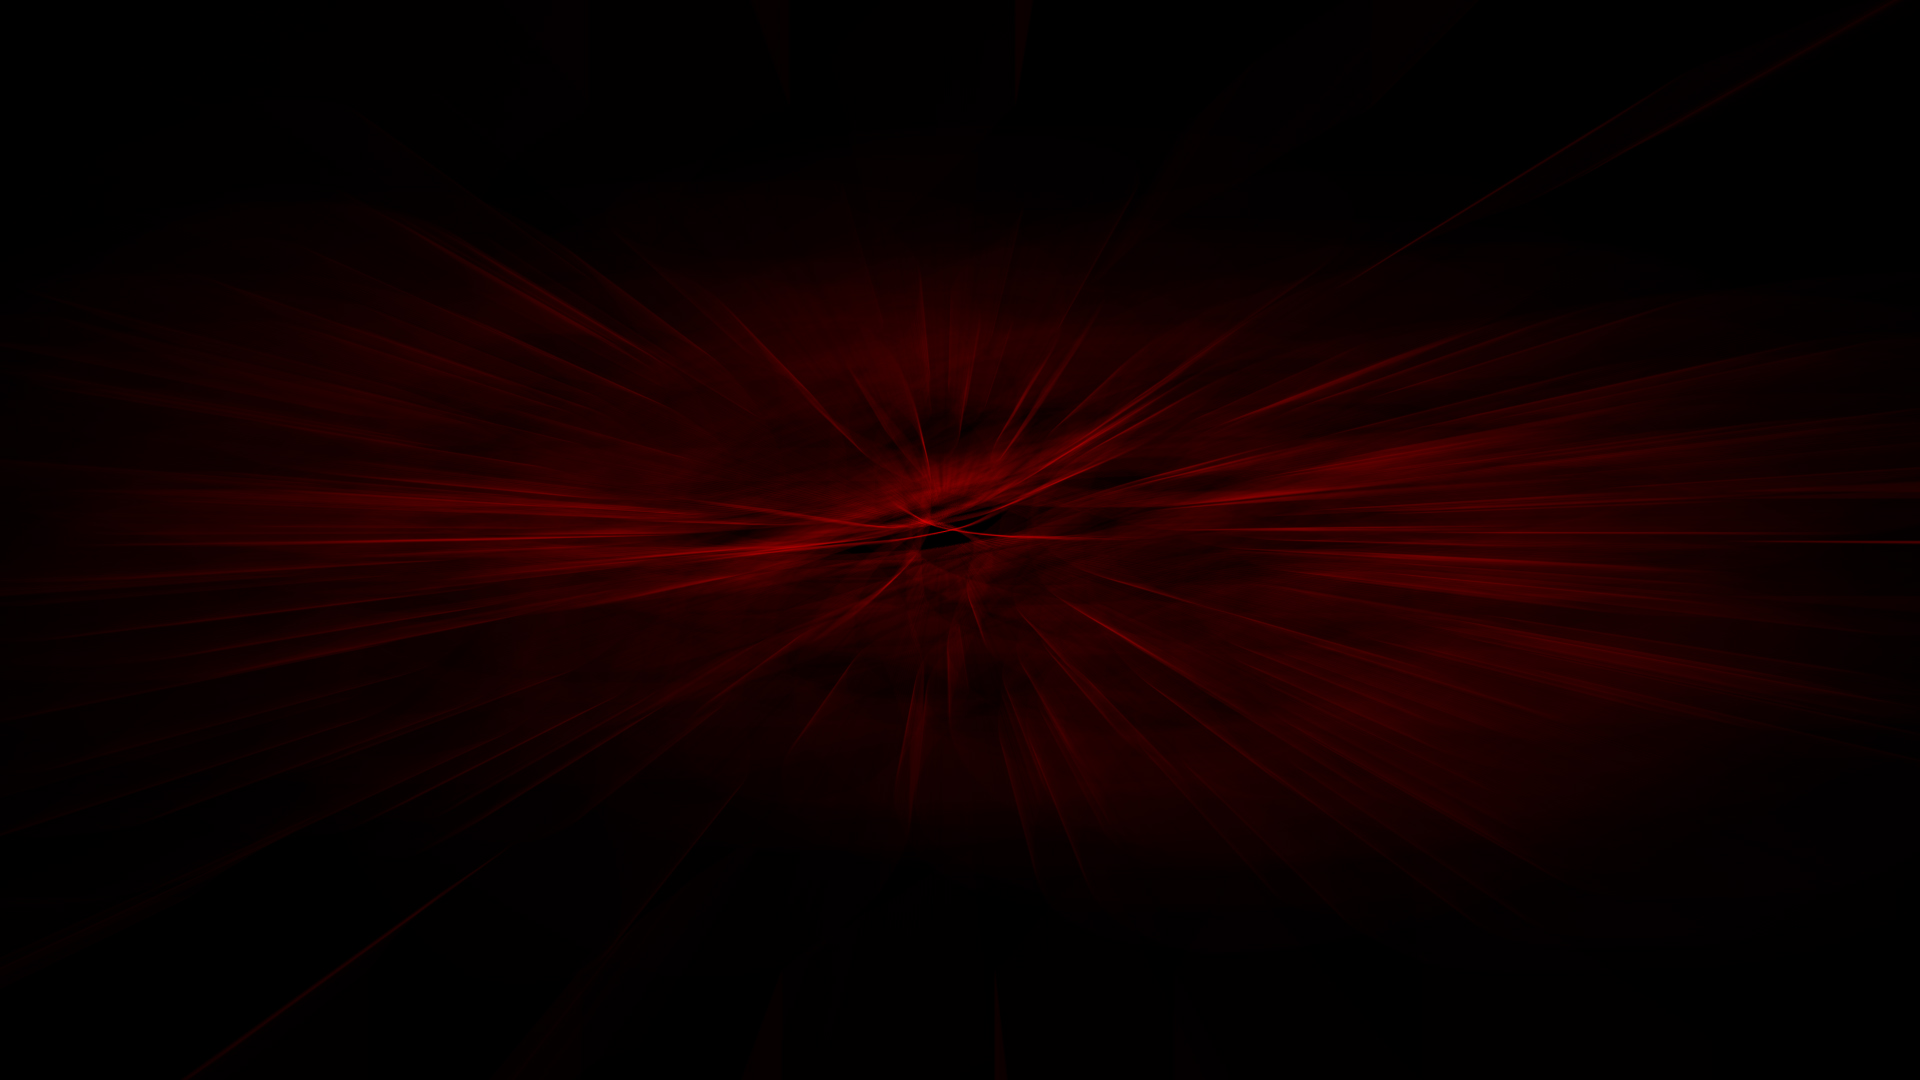 Black And Red Abstract Desktop Background Wallpaper